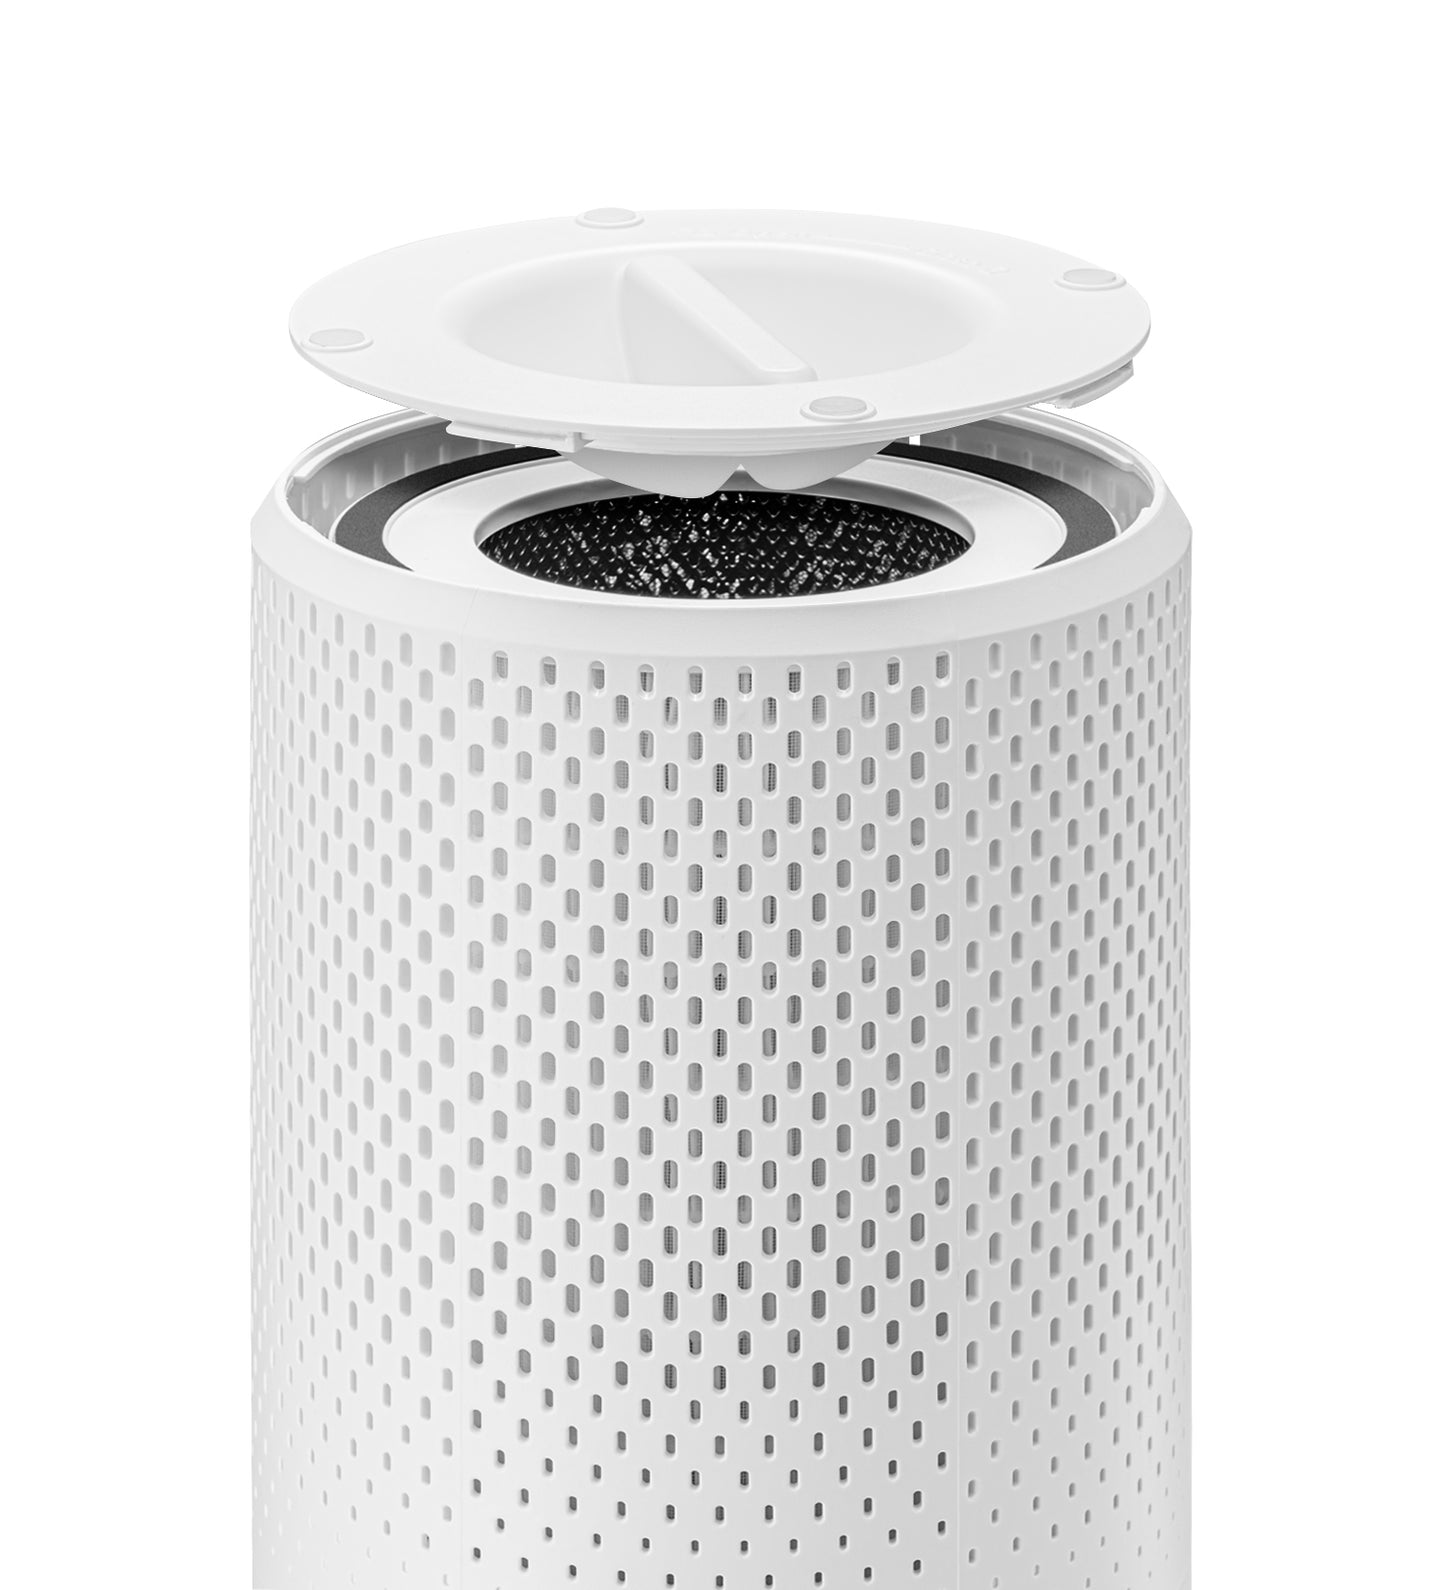 Cuckoo 3-in-1 H13 True HEPA Air Purifier with UV Light (CAC-J1510FW)